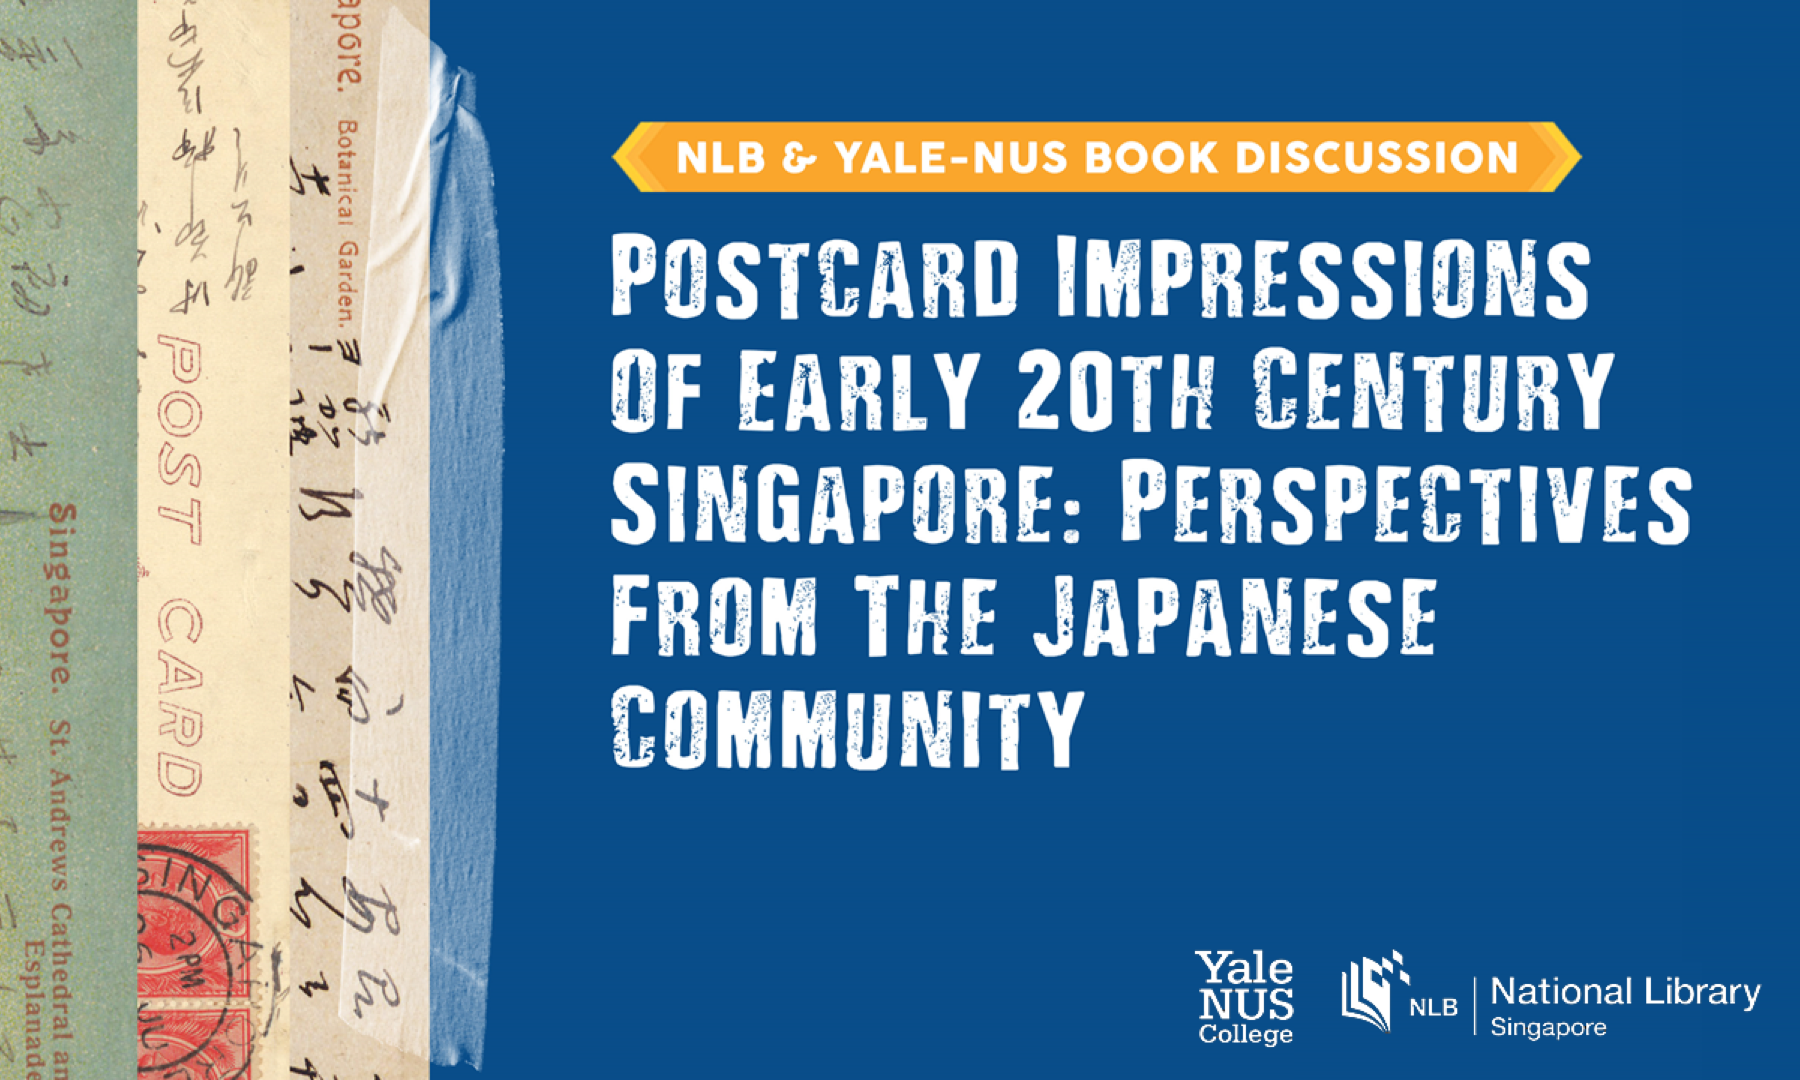 Postcard impressions of early 20th-century Singapore: perspectives from the Japanese community